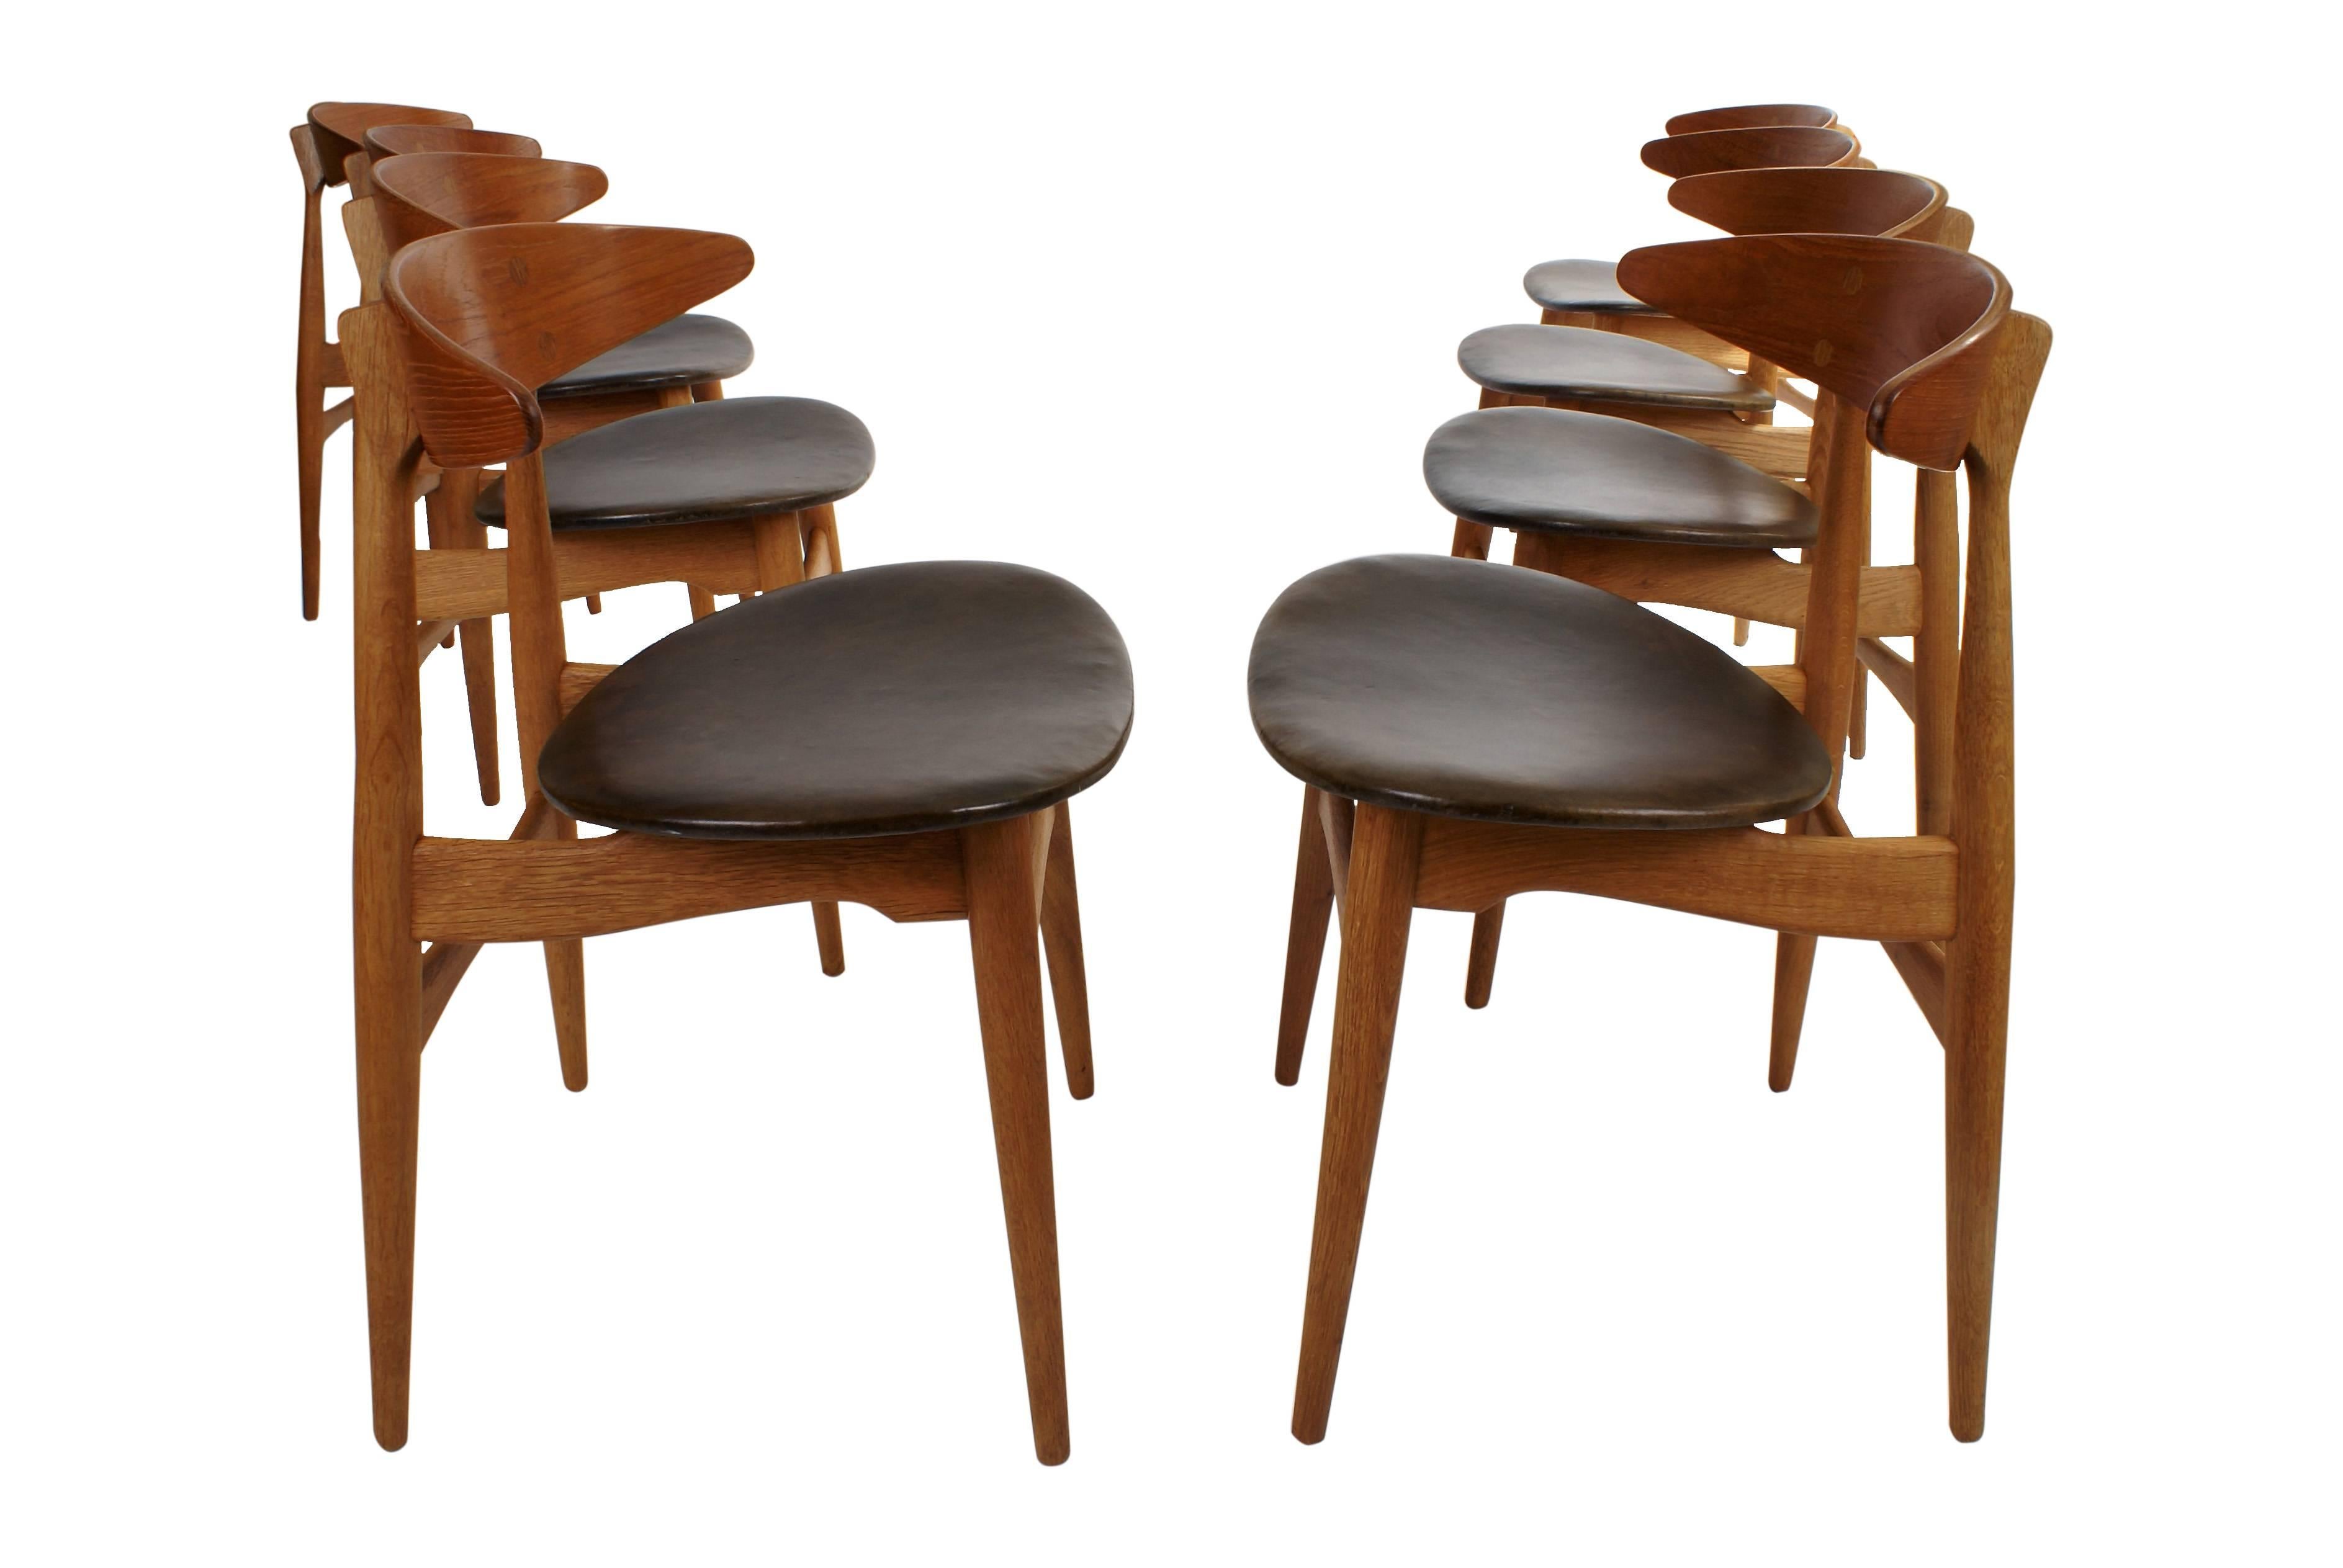 Set of eight Hans Wegner 'CH 33' dining chairs. Backrests are in molded teak on oak frames. Original black leather upholstery. Designed 1957. Manufactured by Carl Hansen. & Søn. All chairs stamped from the manufacturer under seat.

Literature: